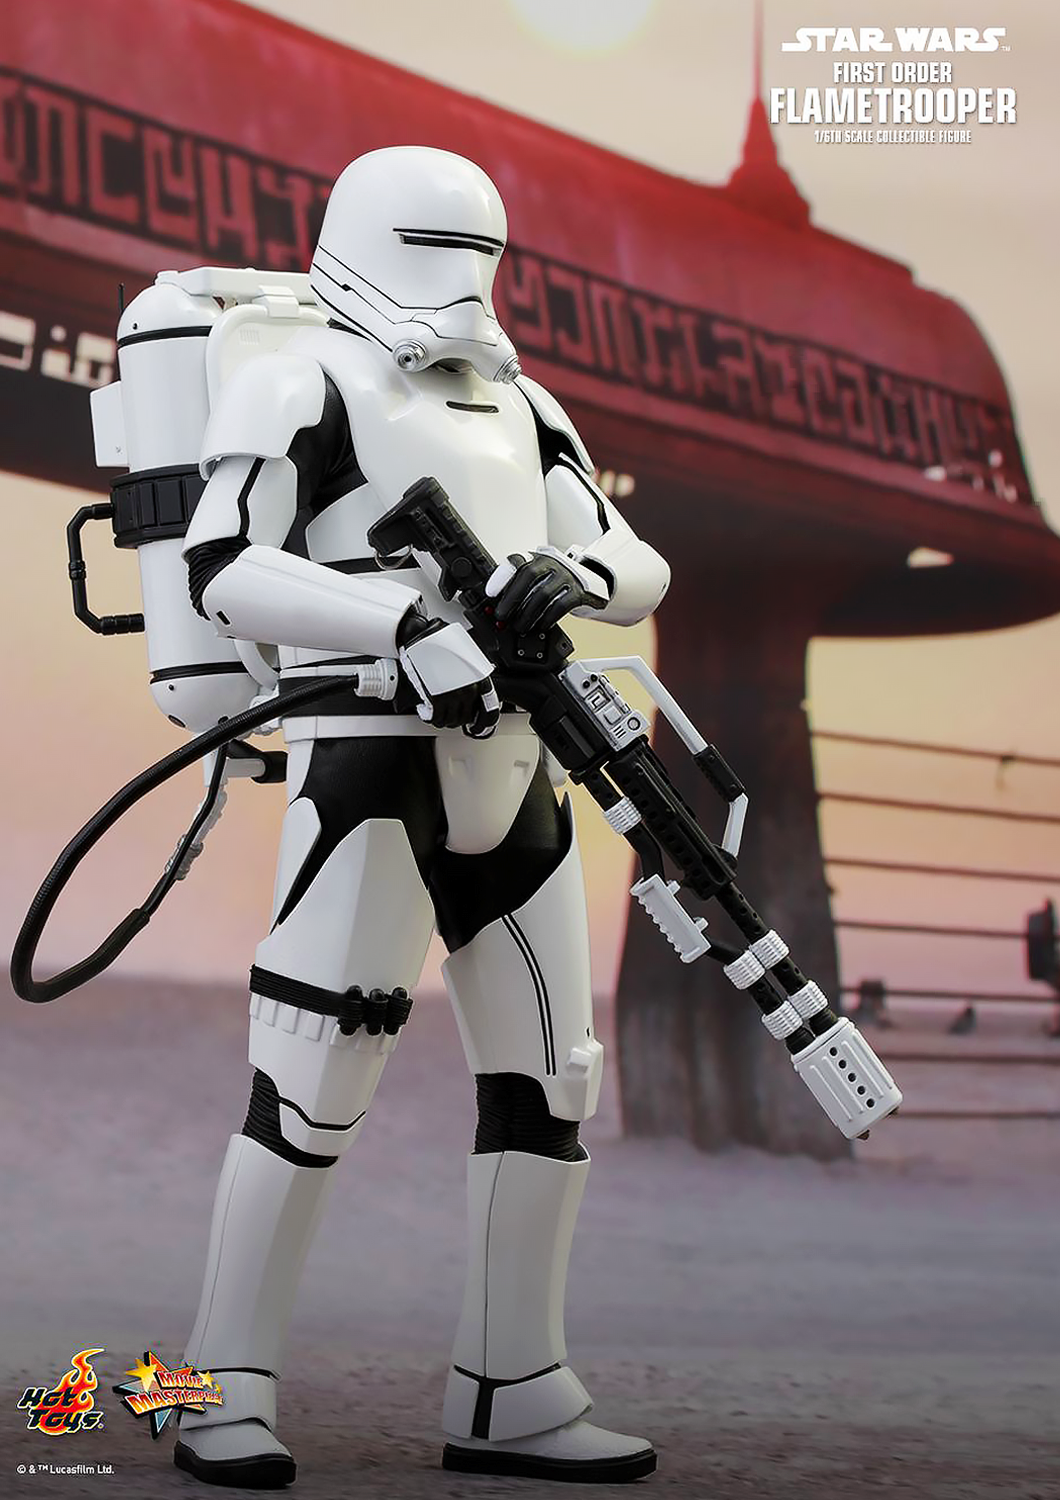 HOT TOYS STAR WARS EPISODE VII: THE FORCE AWAKENS - FIRST ORDER FLAME TROOPER 1/6 MMS326 - Anotoys Collectibles